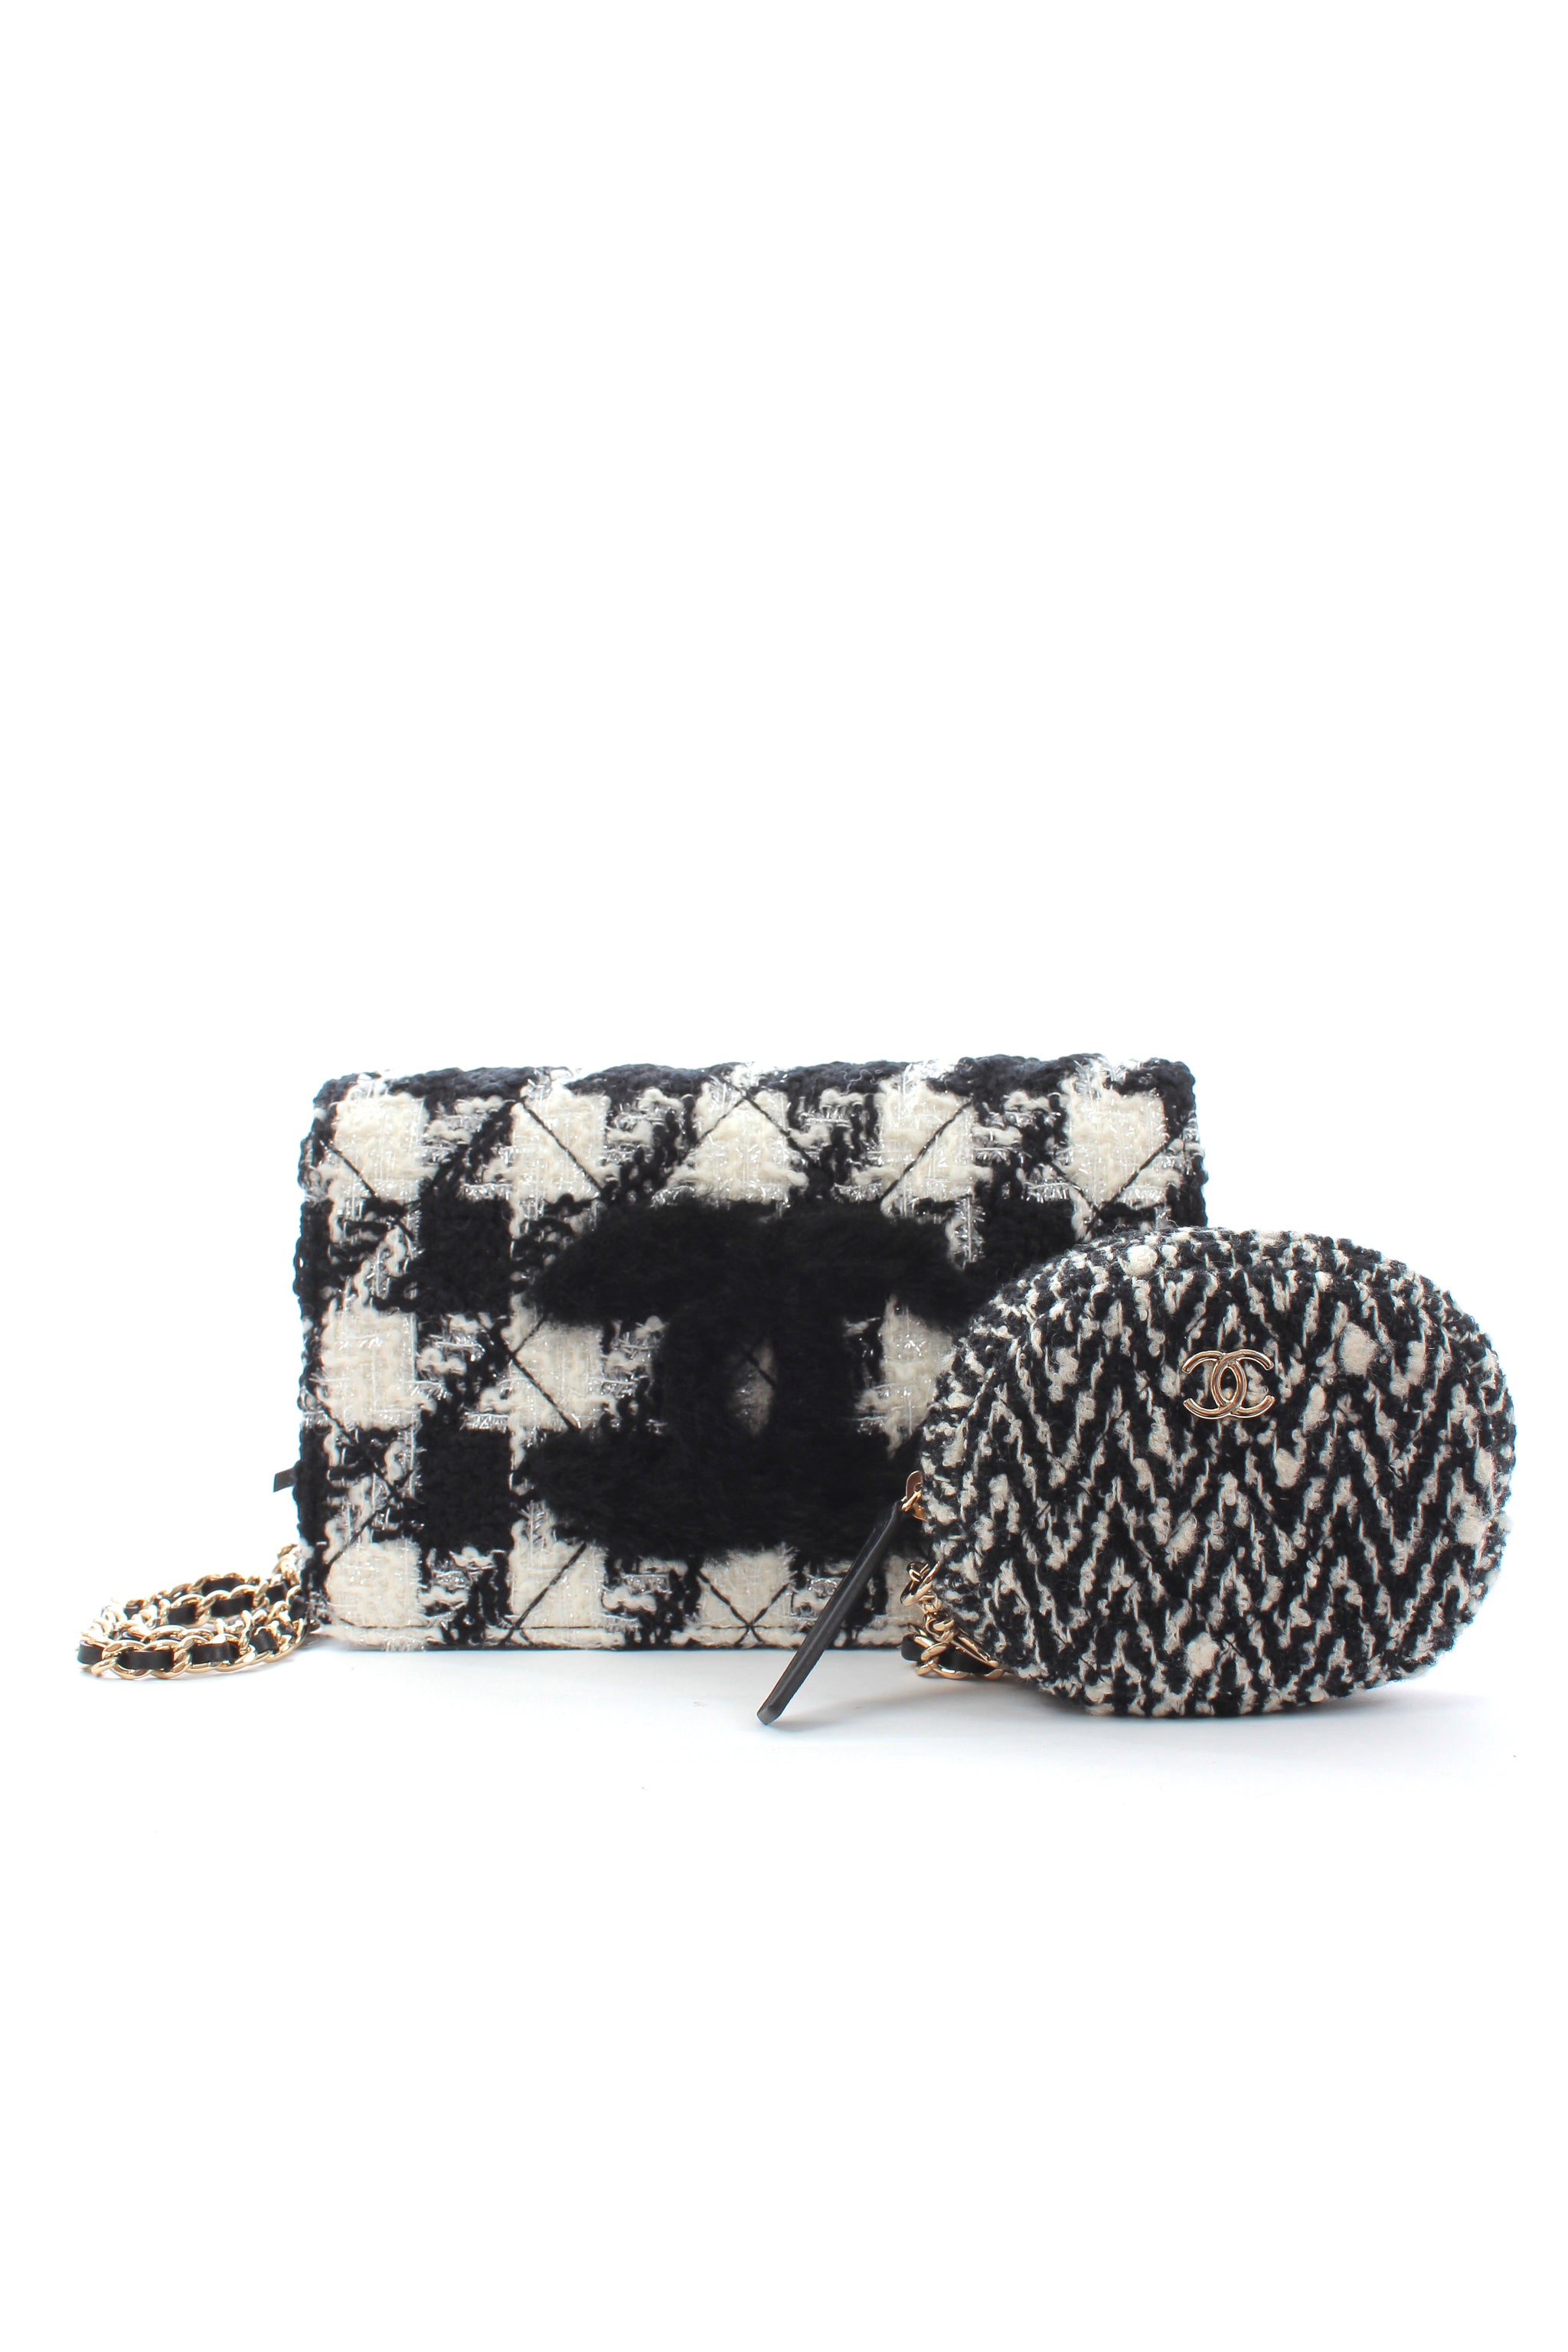 Chanel Houndstooth Tweed Shoulder Bag with Pouch (Fall 2019 Runway Col -  Closet Upgrade